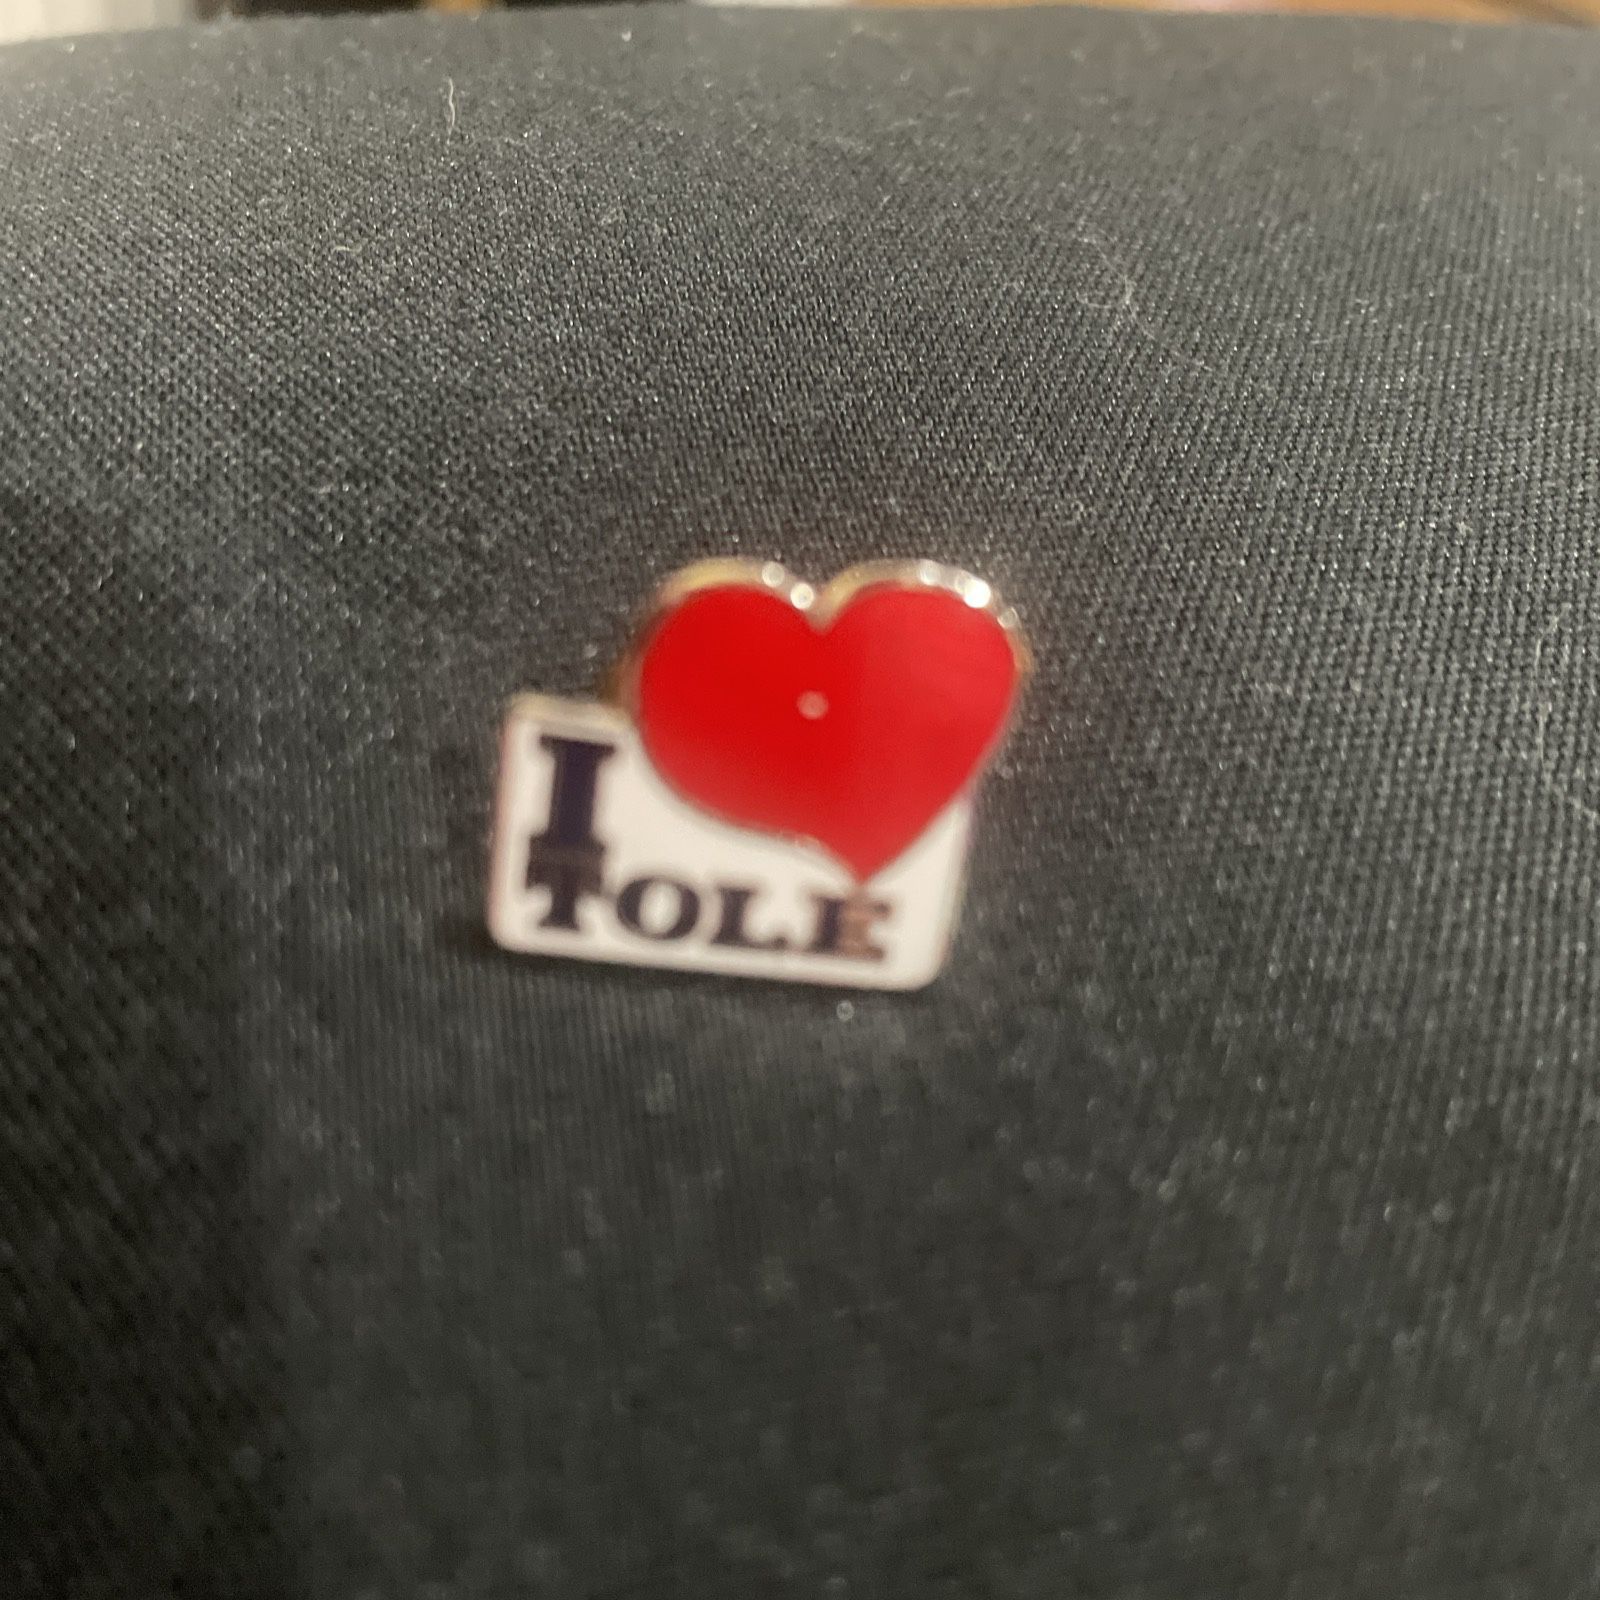 “I Love Tole” Is National Society of Tole Decorative Painters Enamel Pin